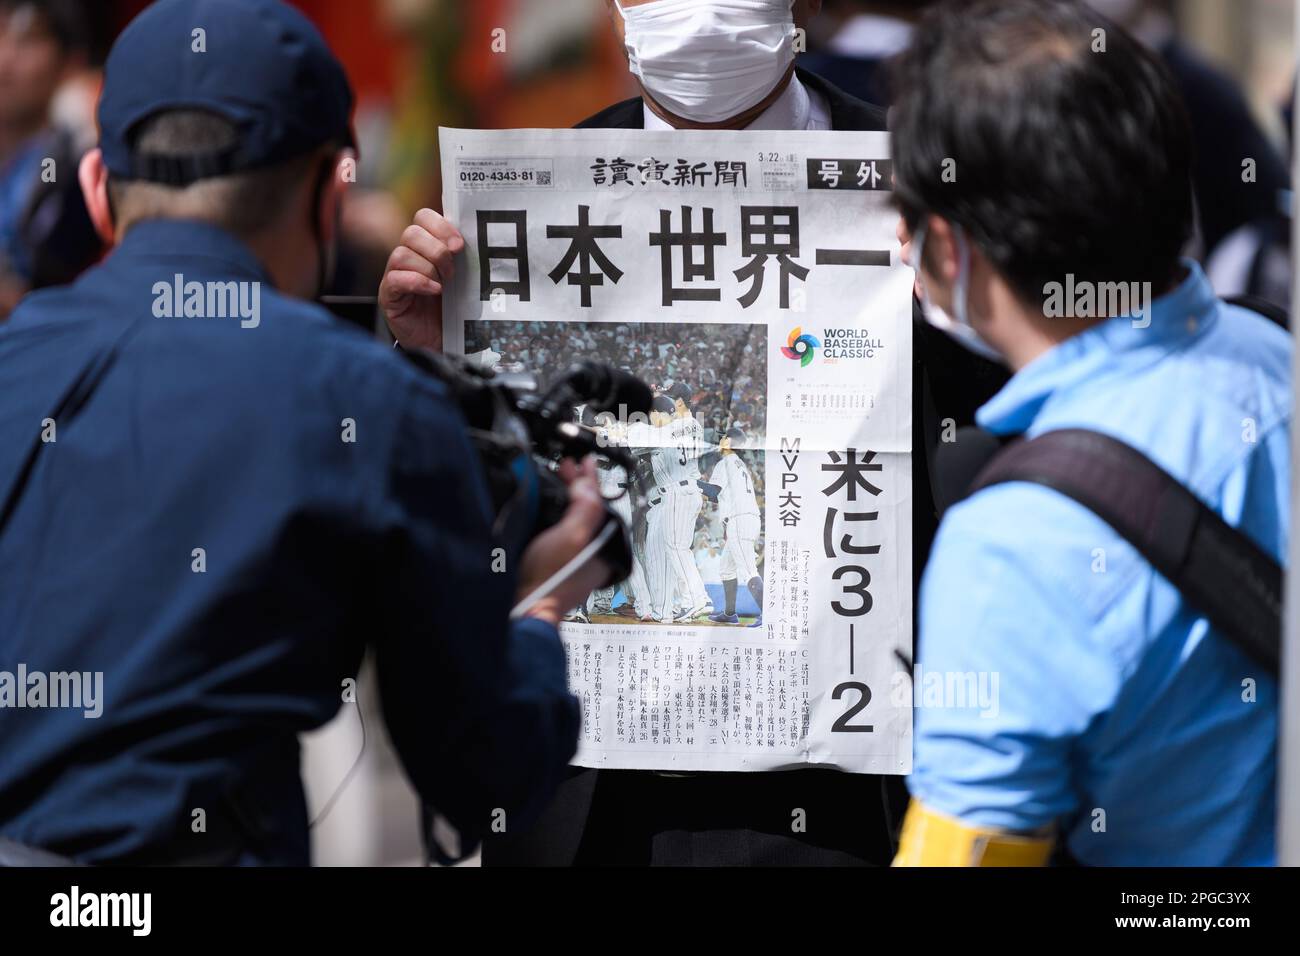 A baseball fan gets interviewed while holding a special edition version of the Yomiuri Newspaper celebrating Team Japan's victory in the 2023 World Baseball Classic final on March 22, 2023, in the Shibuya district of Tokyo, Japan. Japan defeated team USA 3-2 in the tournament final held in Miami to record their third championship title. Credit: Keiichi Miyashita/AFLO/Alamy Live News Stock Photo